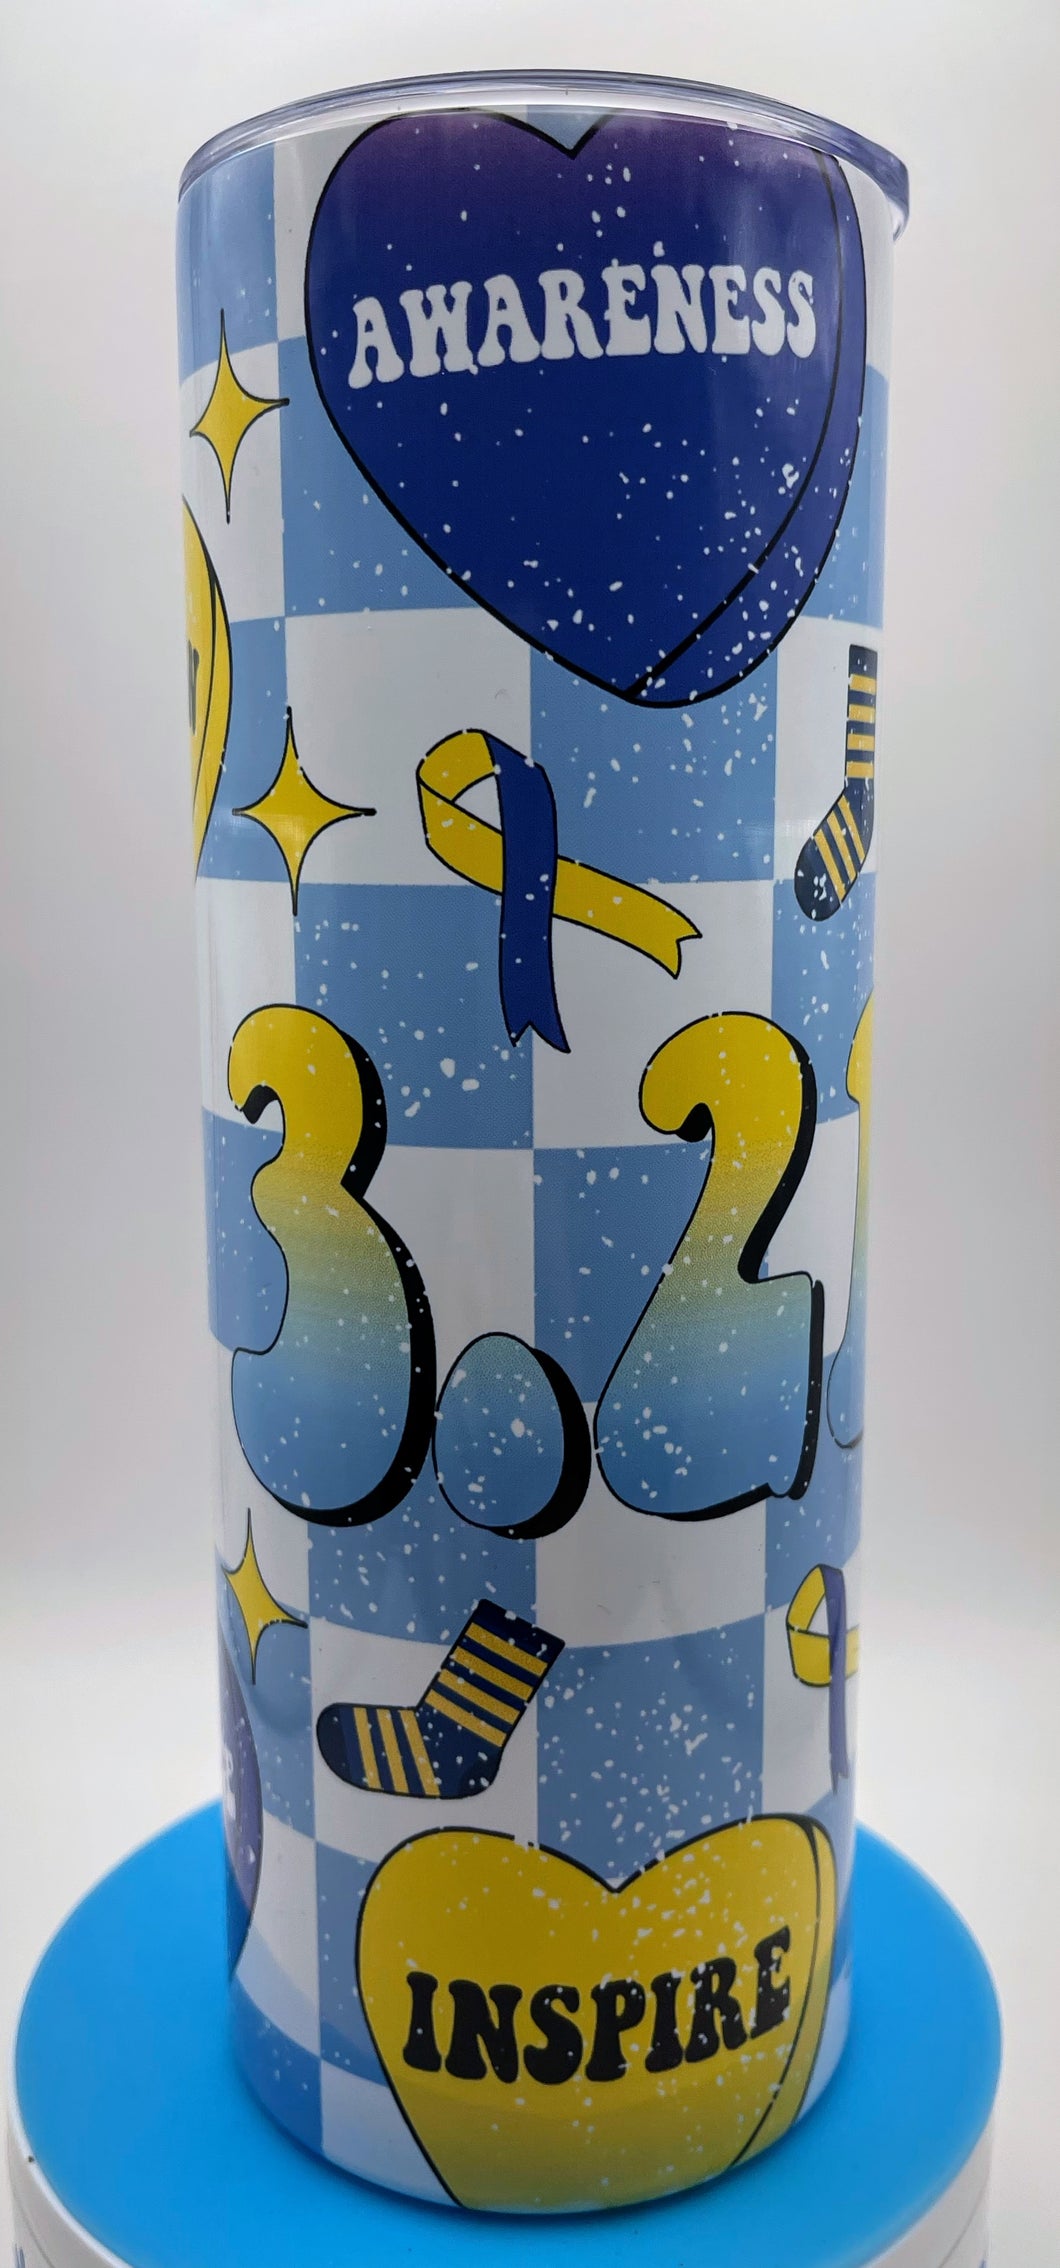 Down Syndrome Awareness 321 Insulated Tumbler